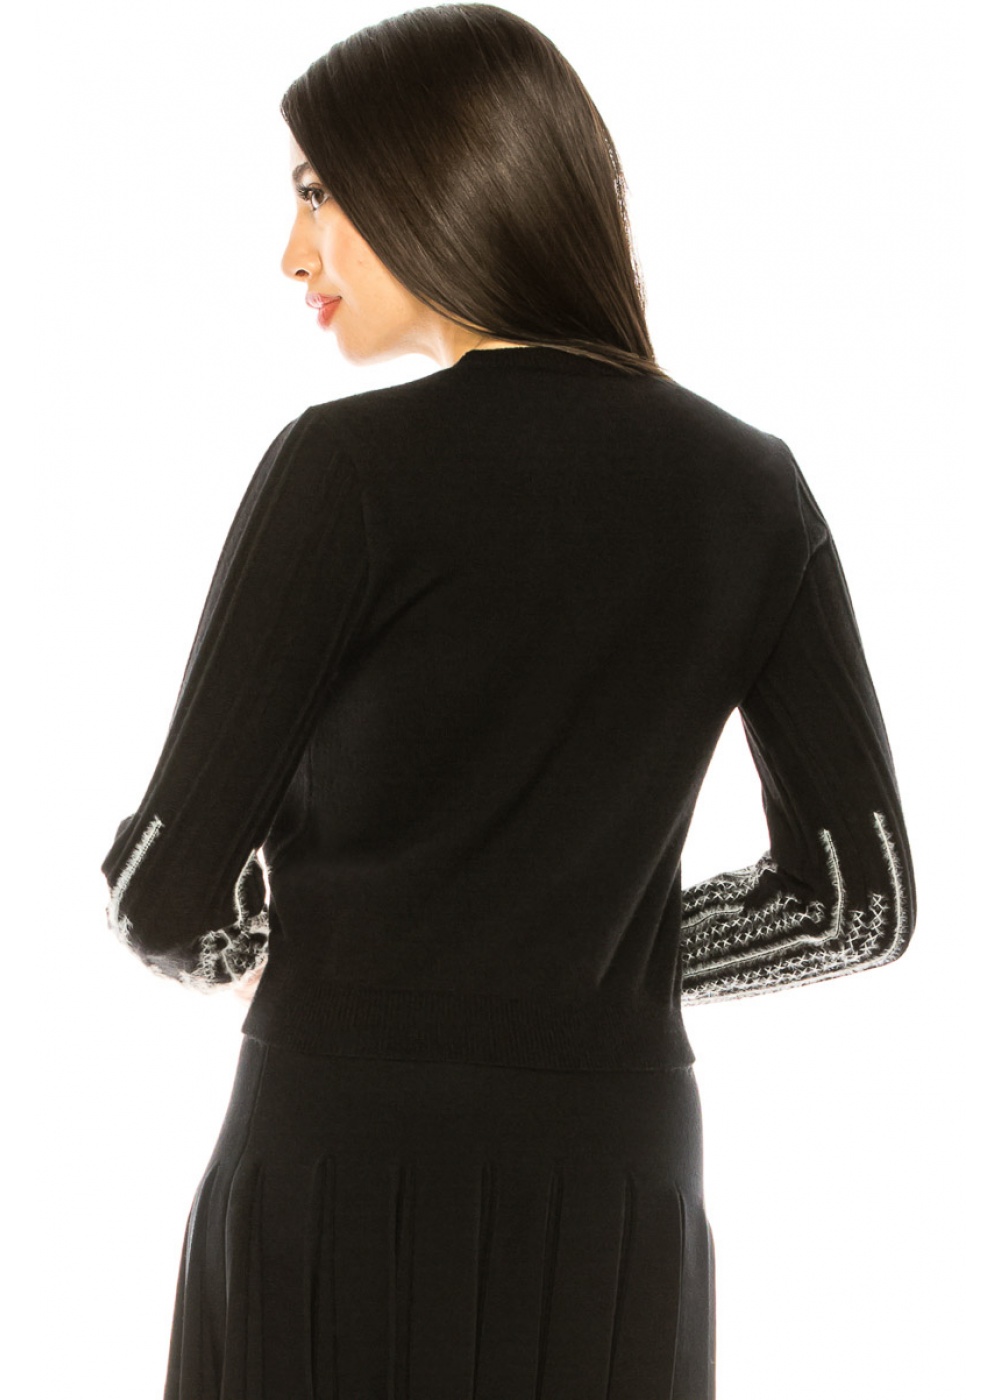 Black sweater with embroidery on sleeves